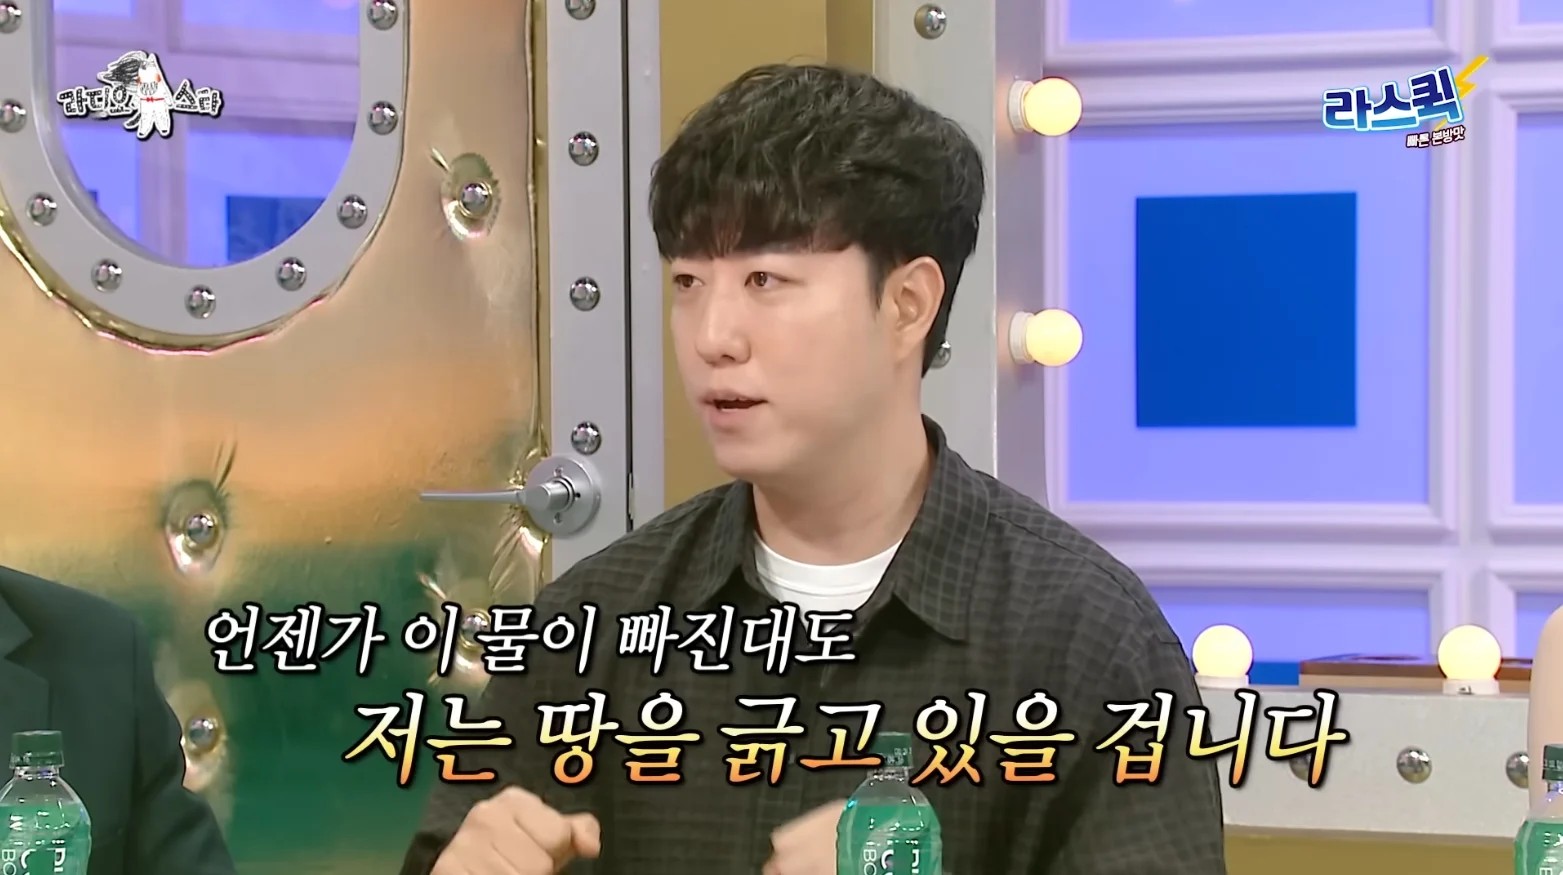 A YouTuber's orbital talk that appeared on Radio Star with as many as 5 people